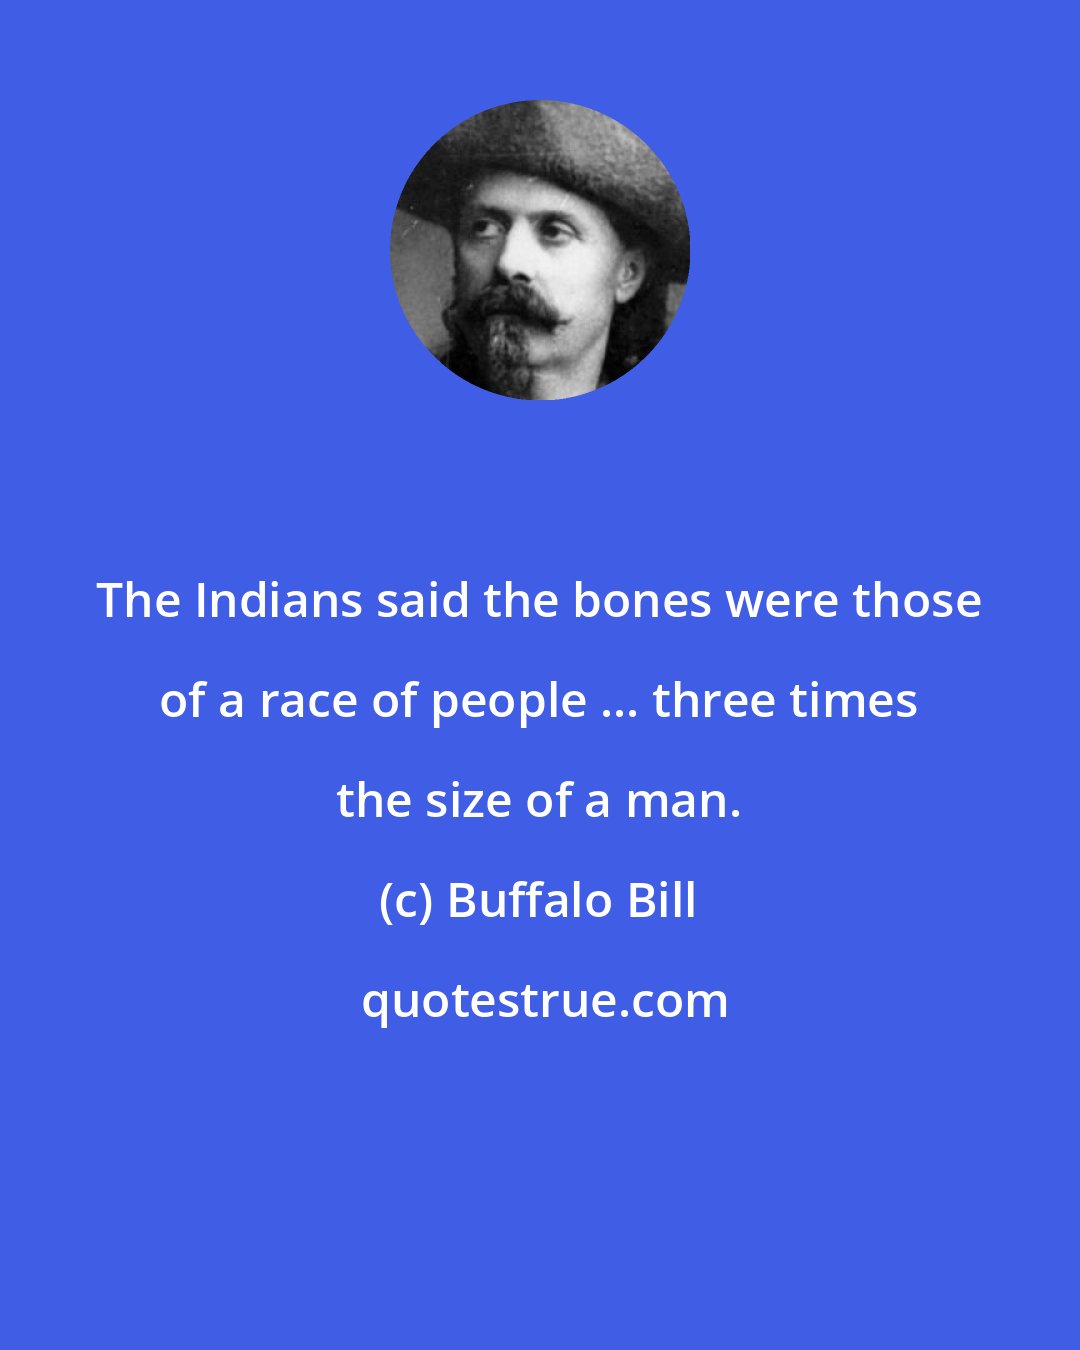 Buffalo Bill: The Indians said the bones were those of a race of people ... three times the size of a man.